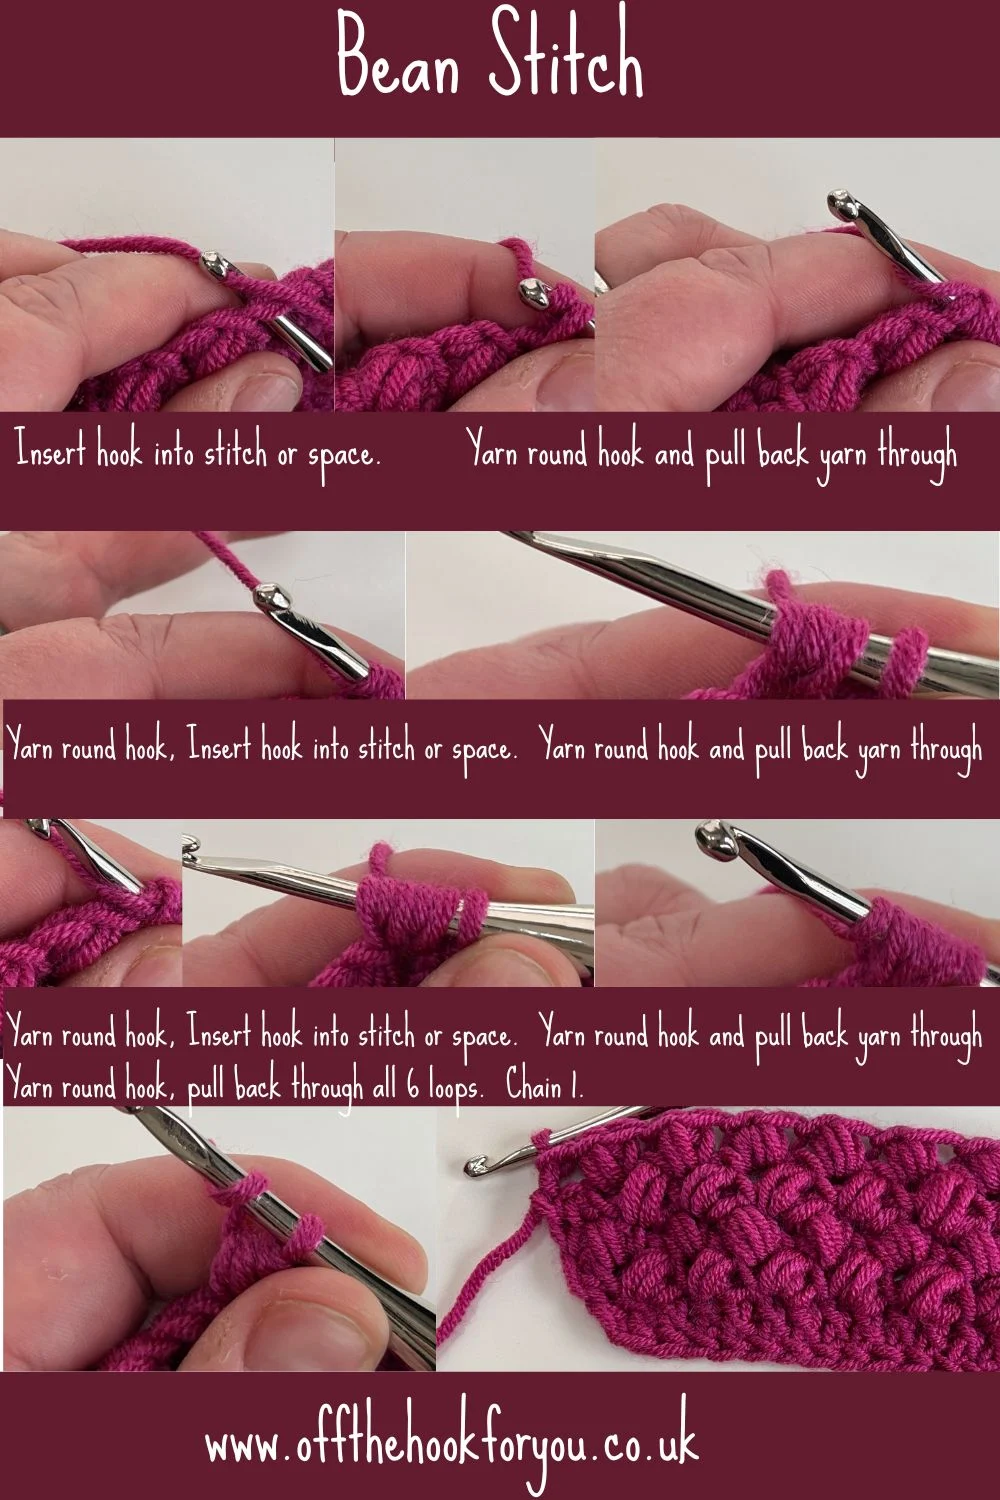 How to crochet the bean stitch
